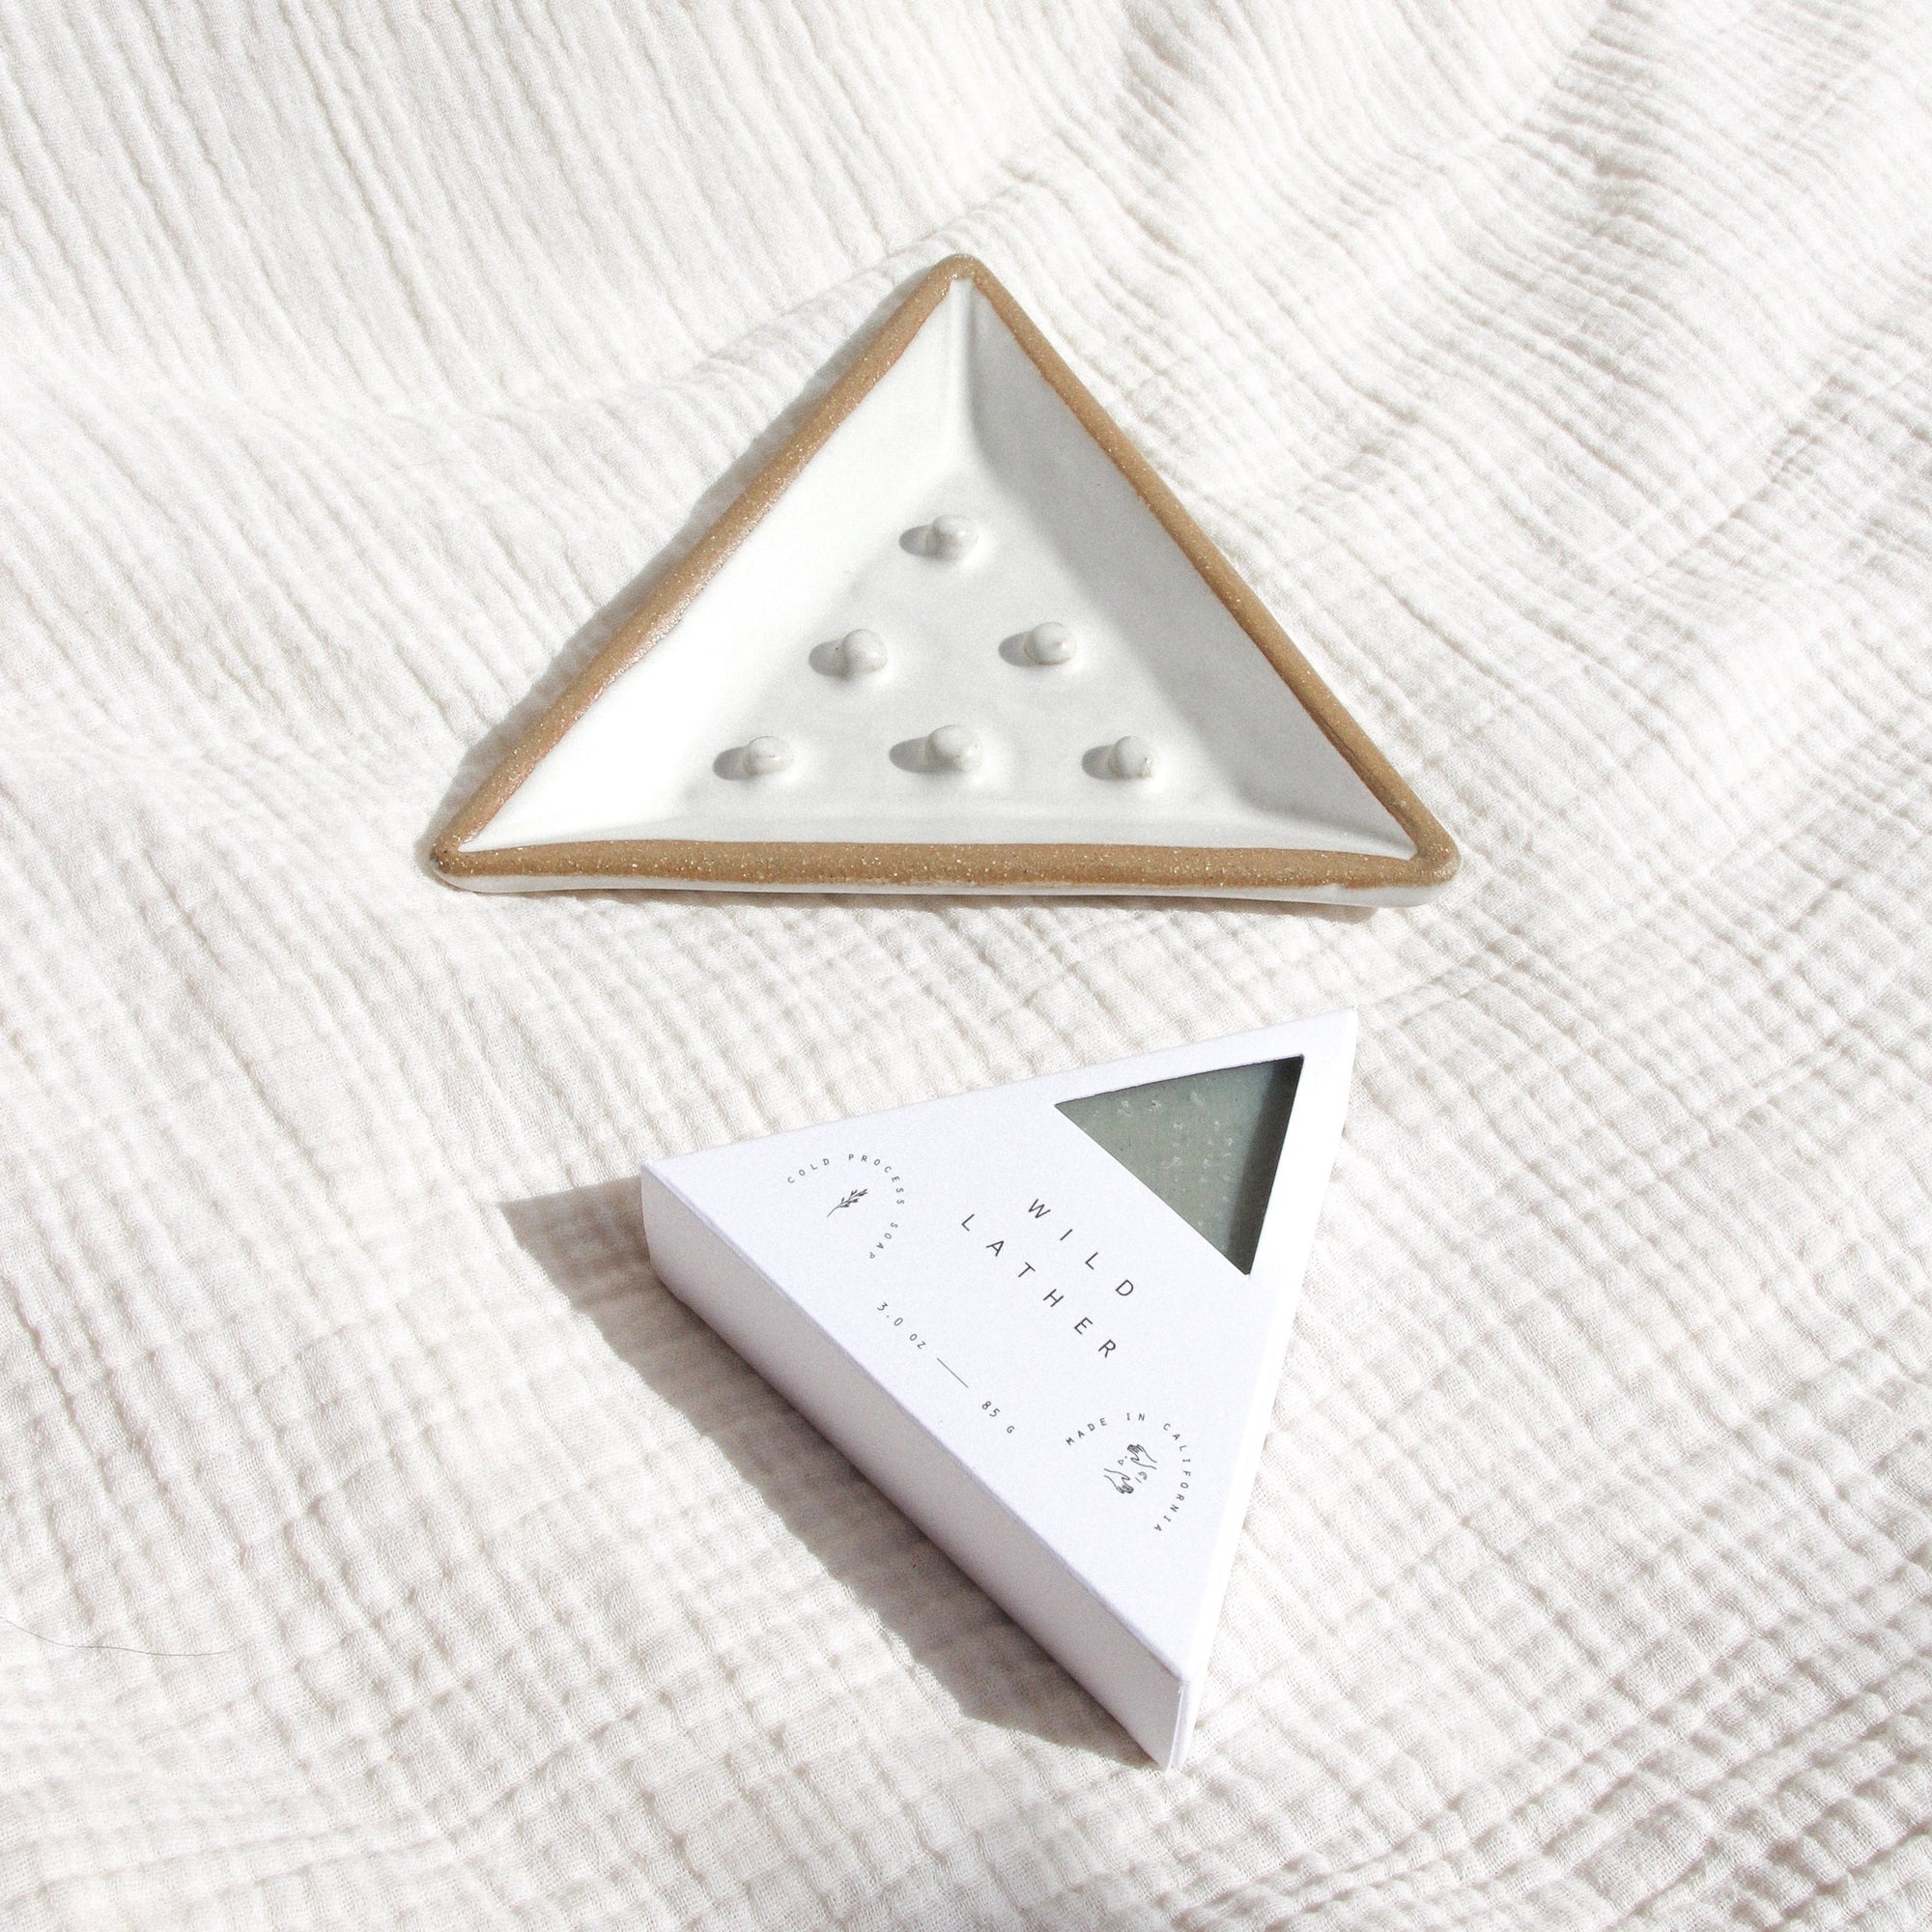 A ceramic triangular soap dish and triangle soap against textured linen